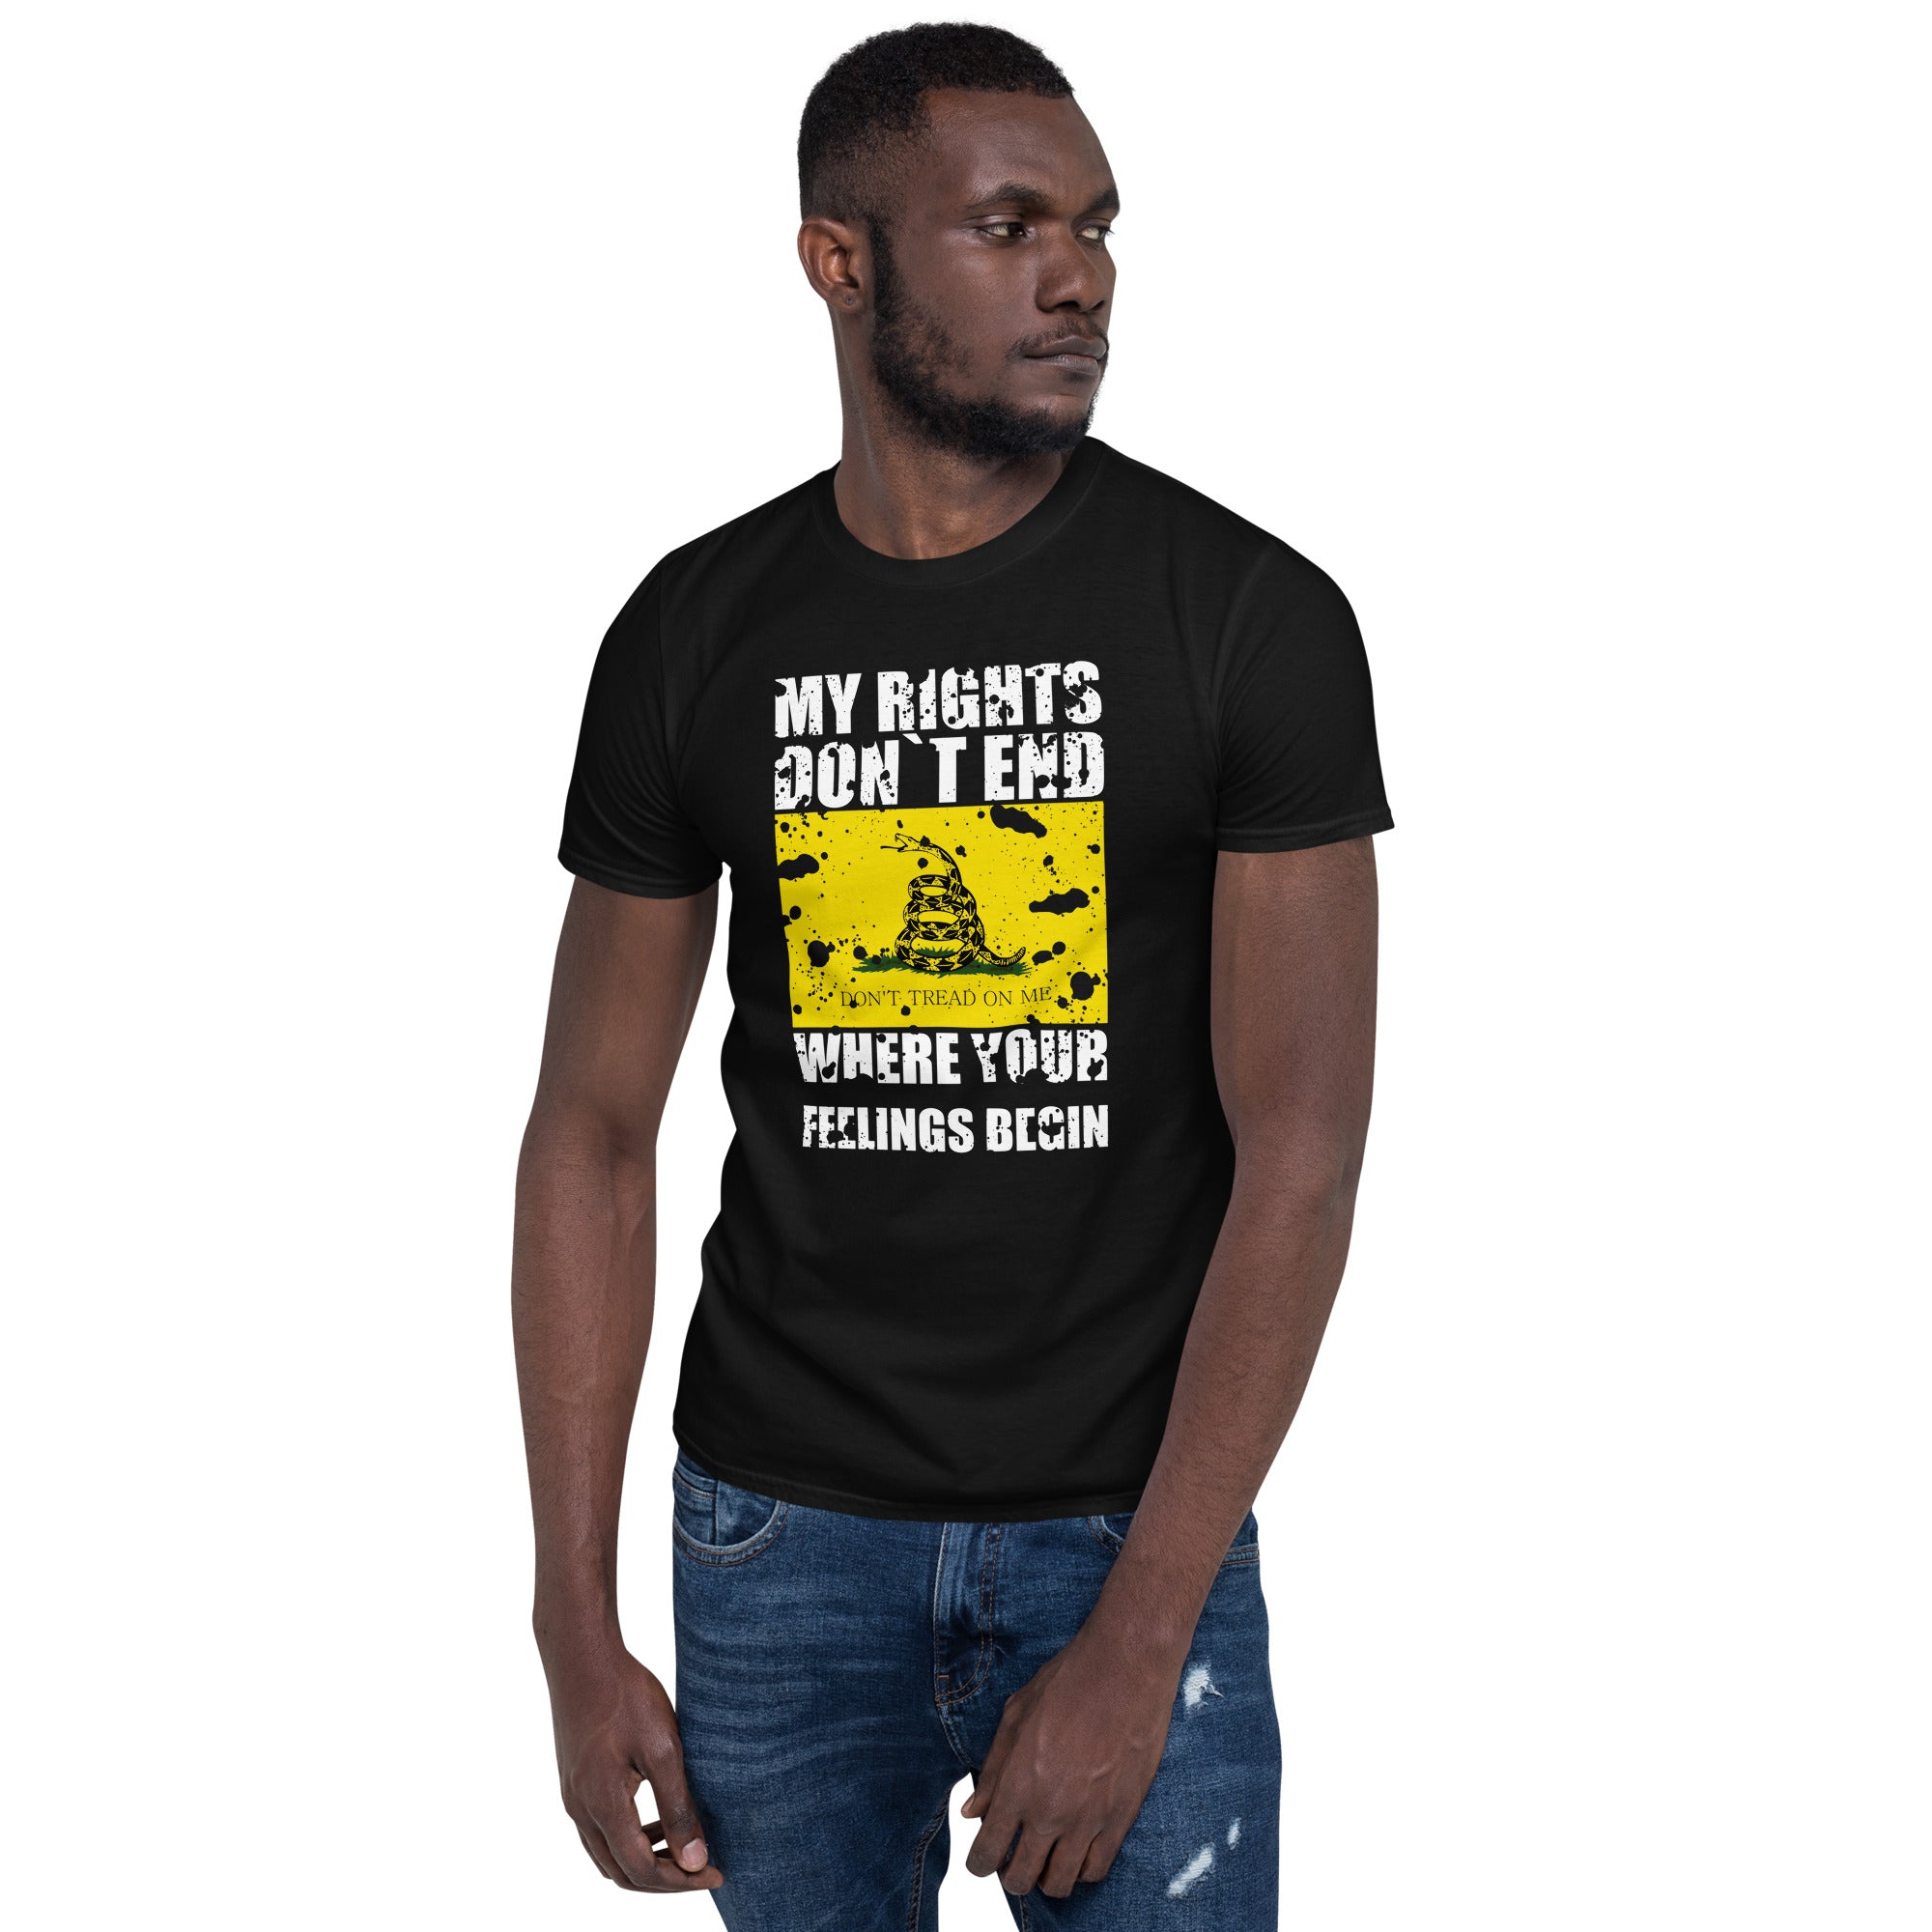 My Rights Don't End - Short-Sleeve Unisex T-Shirt